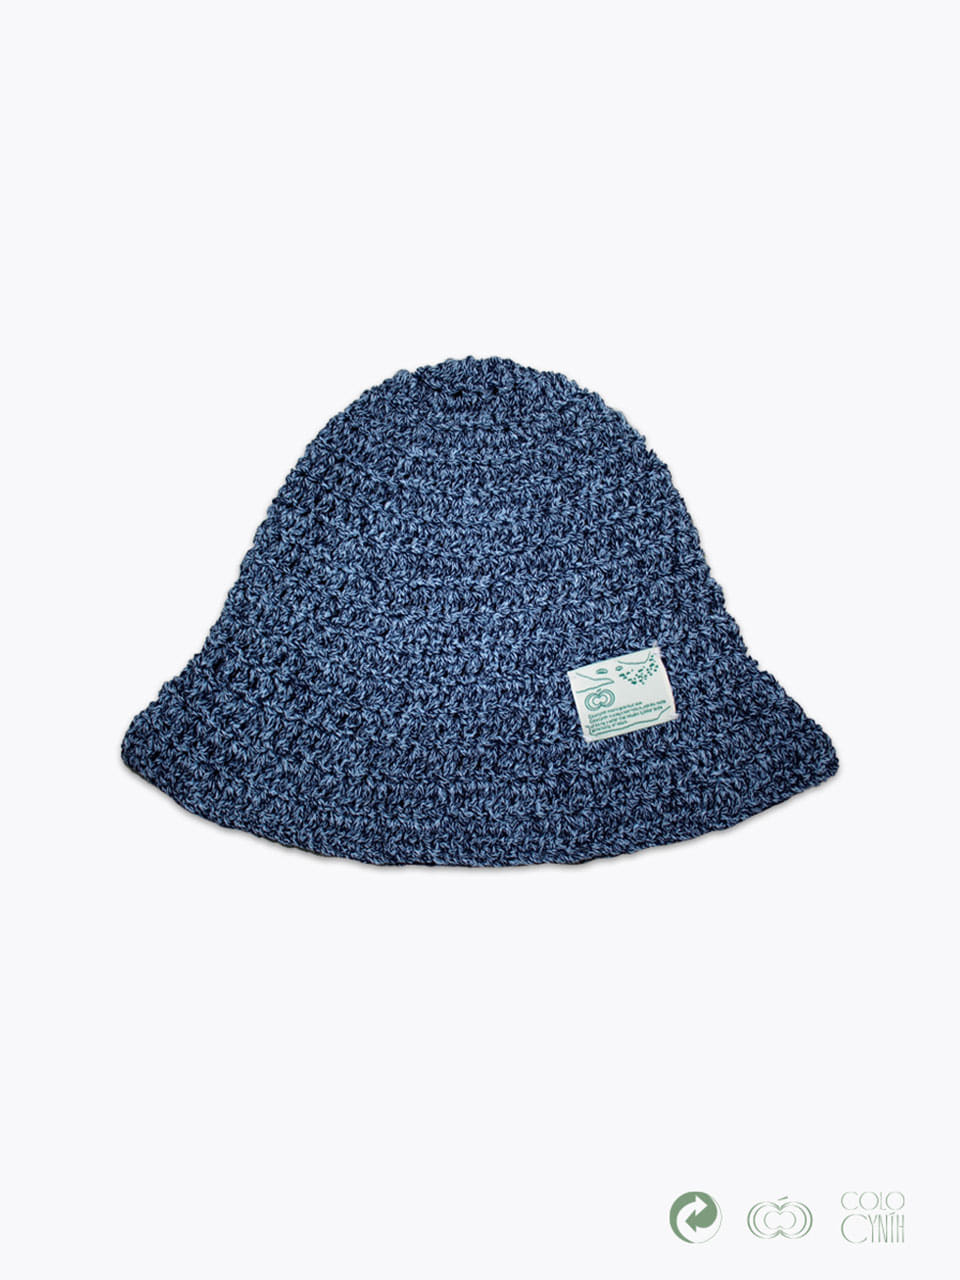 COMO RECYCLE HAT BLUE MIX